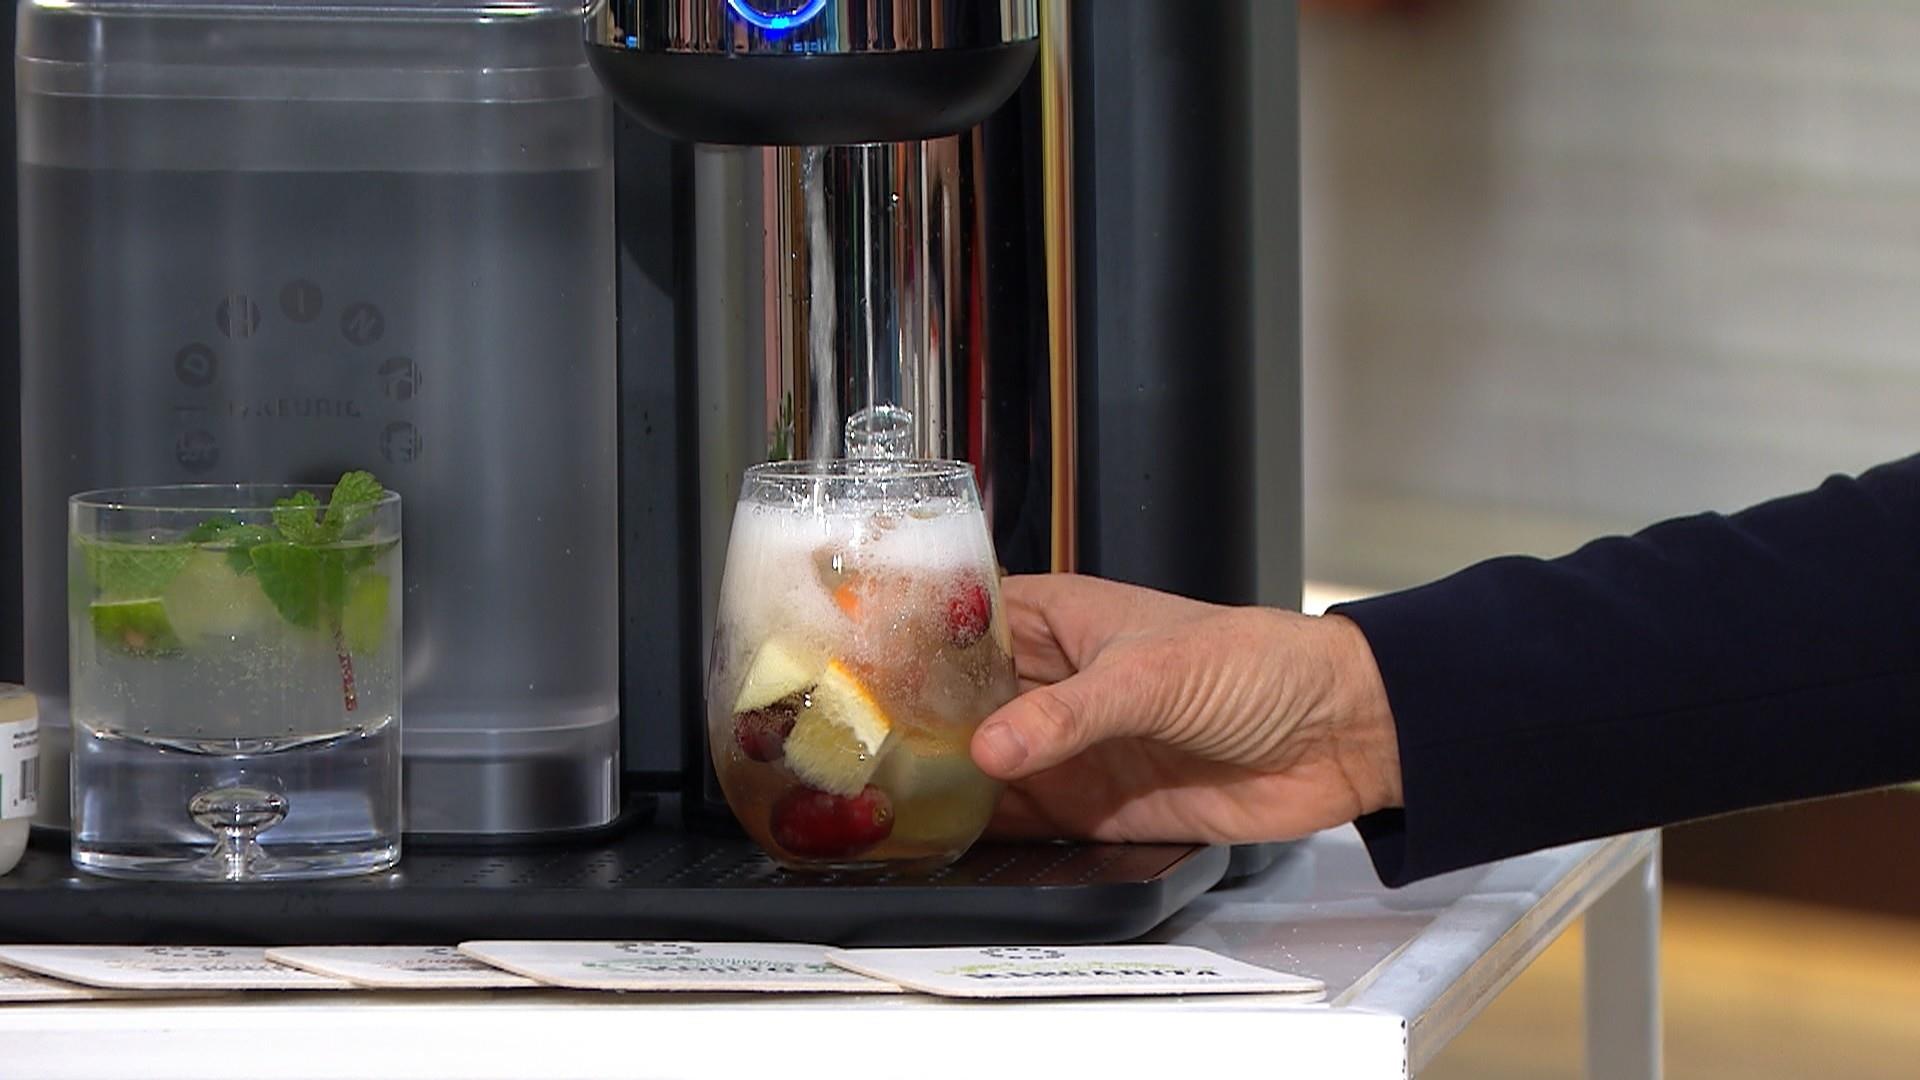 Keurig cocktail machine will soon be available in more states